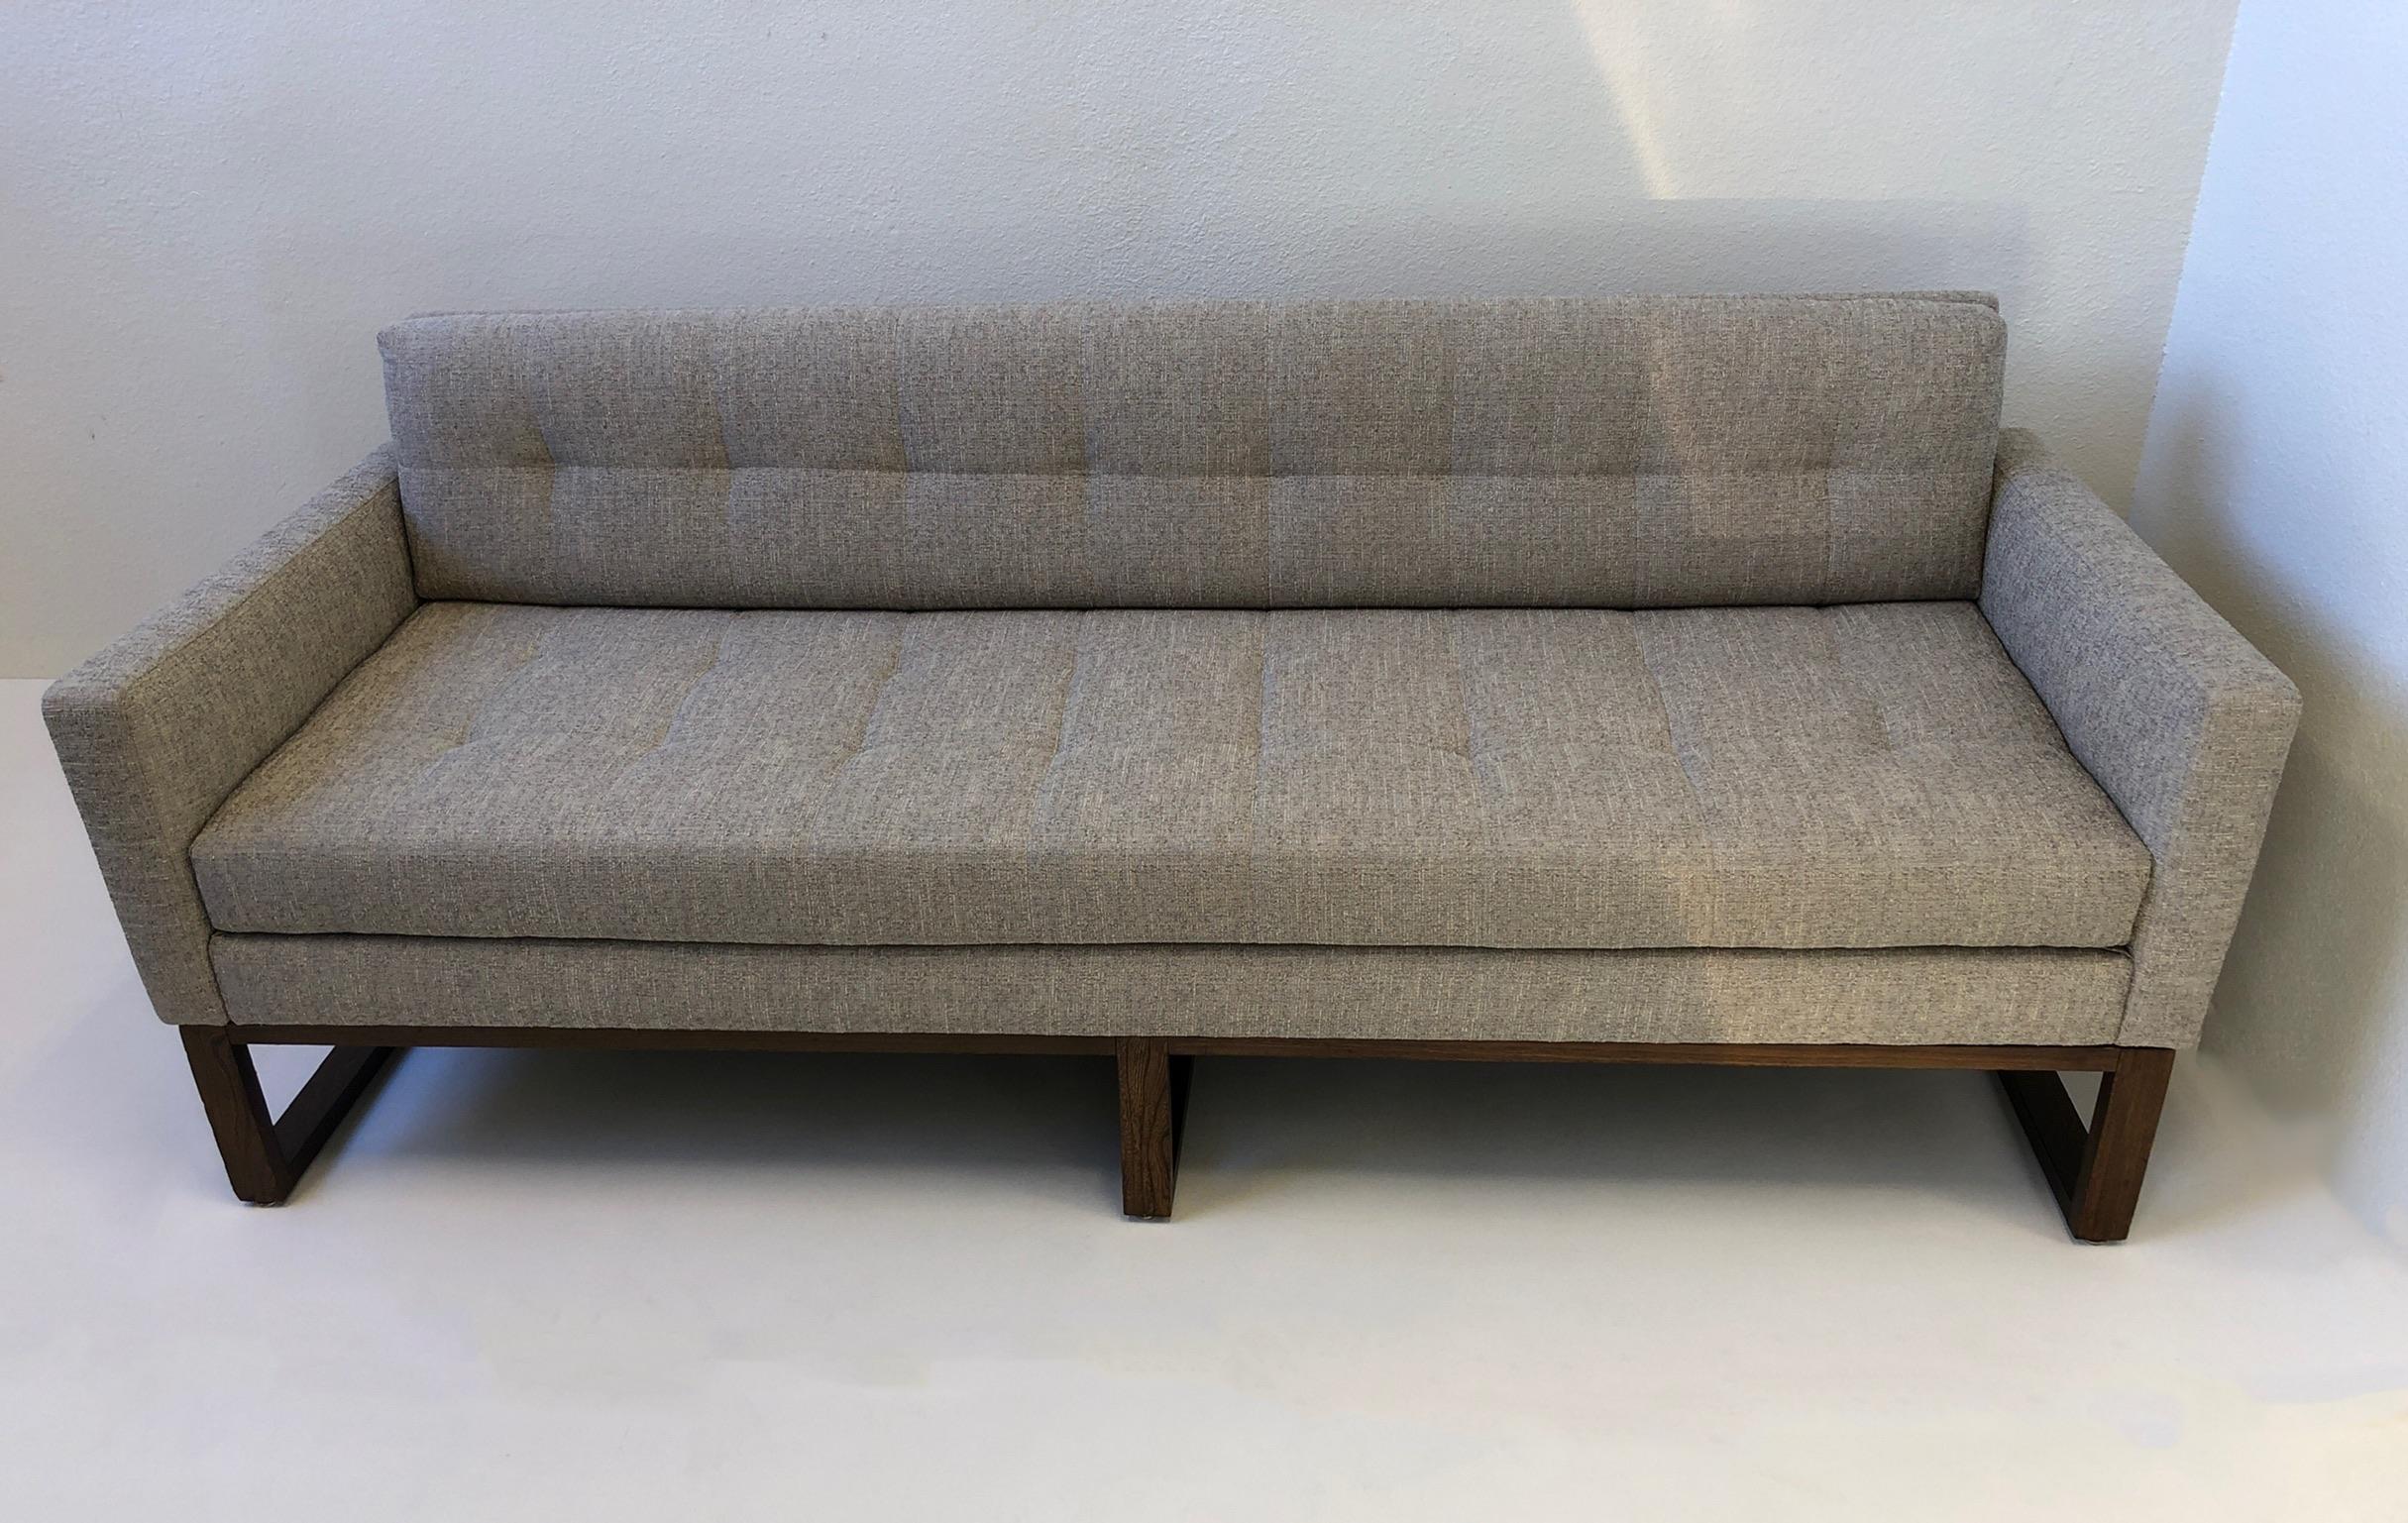 A beautiful 1970s sofa with a walnut leg frame. The sofa has been newly recovered, the frame is in original condition and it has minor chips on the back legs (see detail photos).
Measurements: 79” wide 30” deep 18” seat 23.5” arm 30” back.